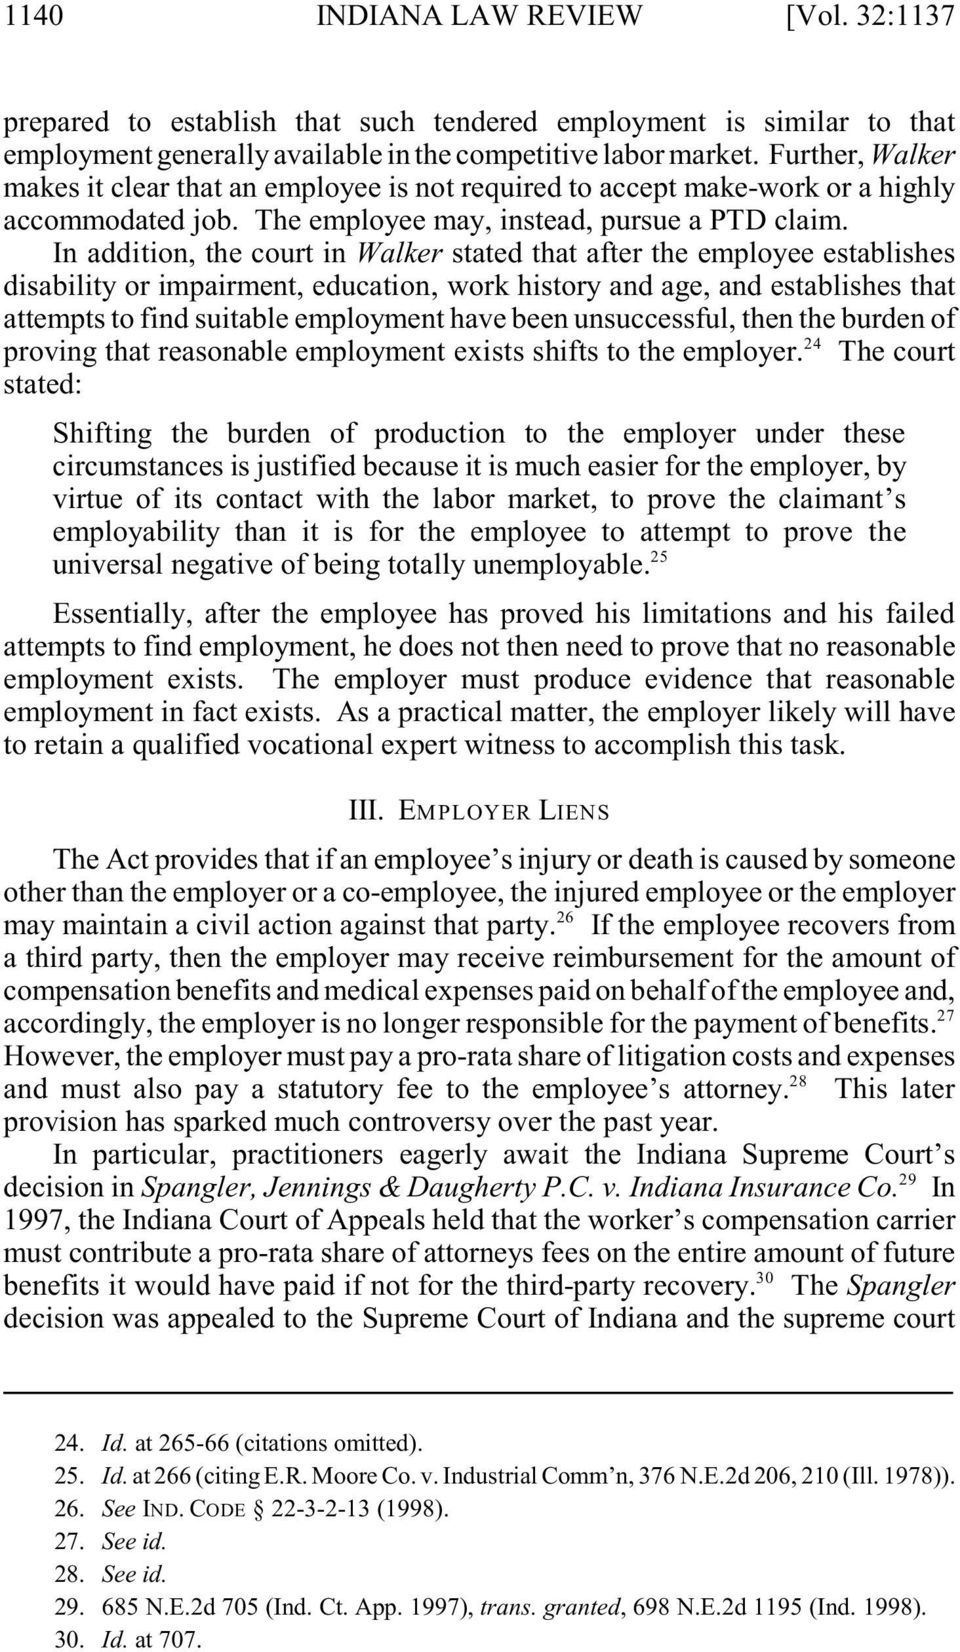 In addition, the court in Walker stated that after the employee establishes disability or impairment, education, work history and age, and establishes that attempts to find suitable employment have